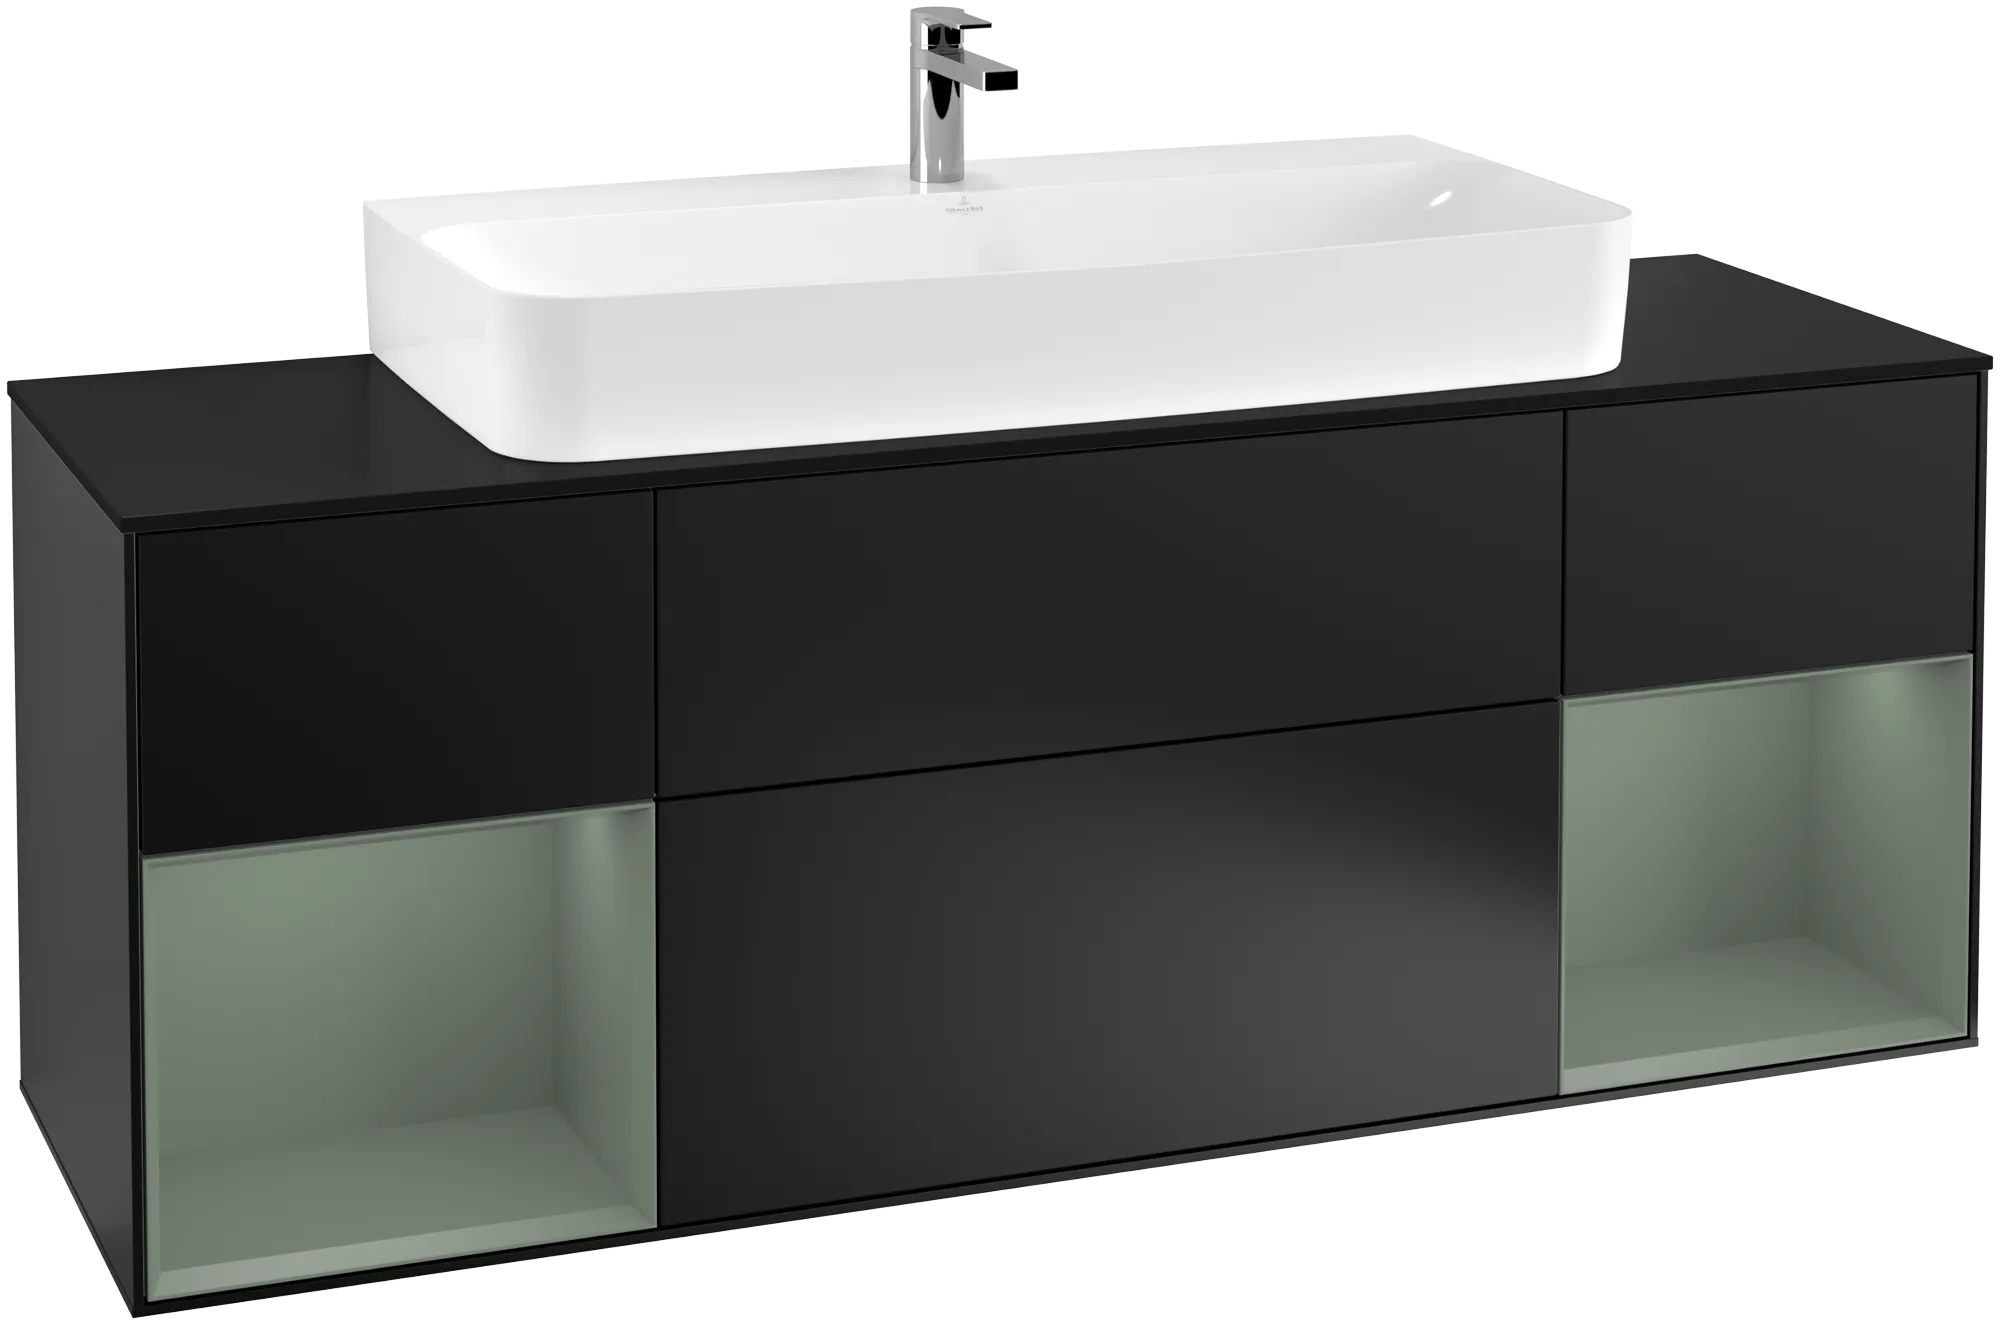 Picture of VILLEROY BOCH Finion Vanity unit, with lighting, 4 pull-out compartments, 1600 x 603 x 501 mm, Black Matt Lacquer / Olive Matt Lacquer / Glass Black Matt #G212GMPD